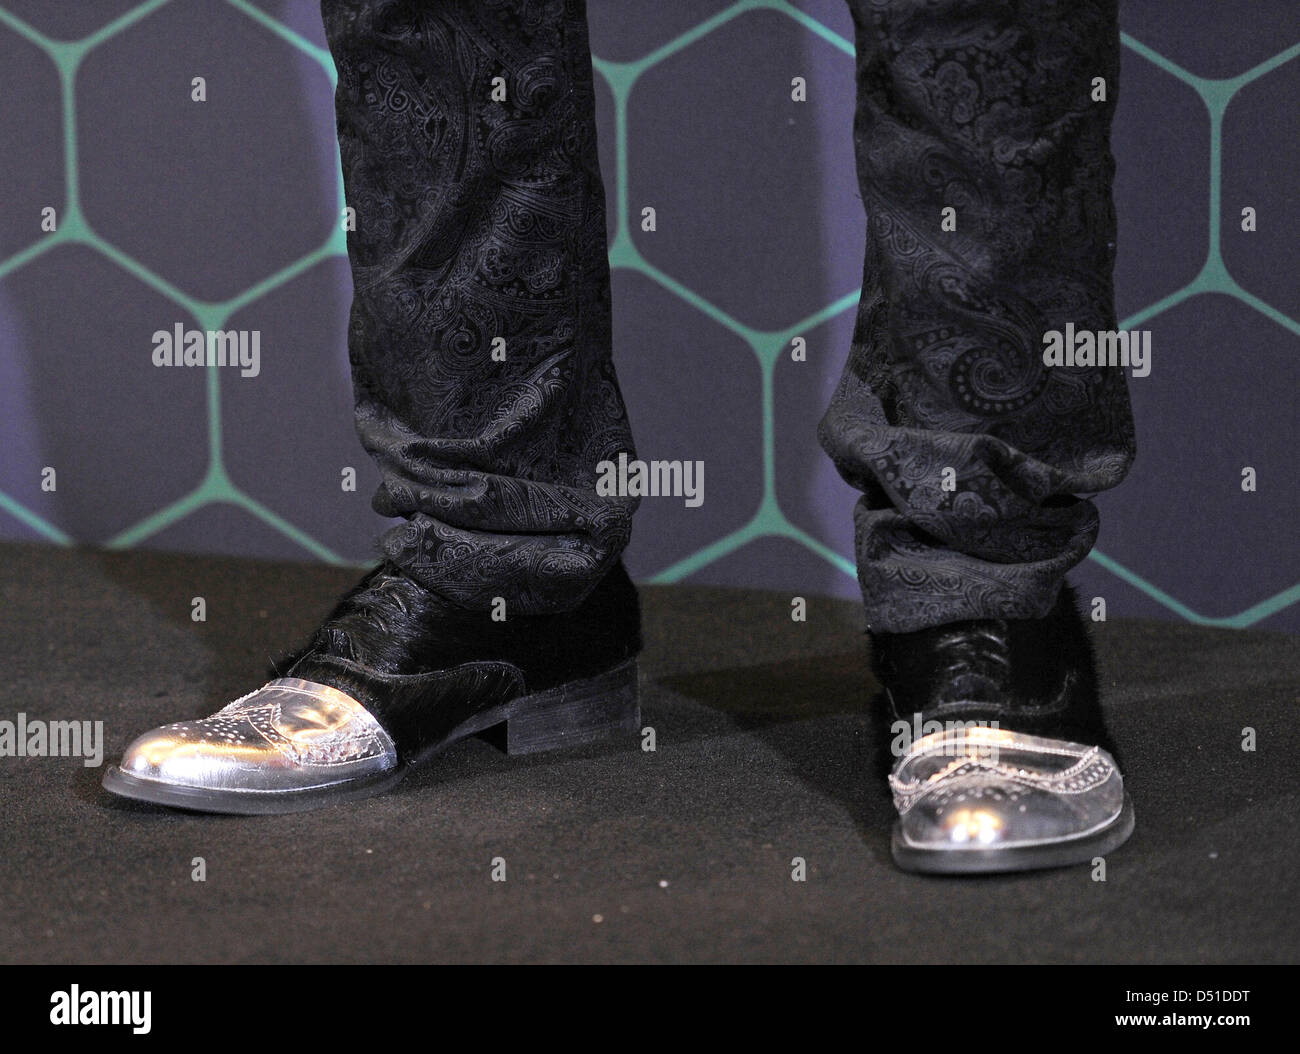 Taiwanese actor Jay Chou wears extravagant shoes for a promotional event for the film 'The Green Hornet' in Berlin, Germany, 03 December 2010. The film is an adaptation of a superhero comic and premieres in German cinemas on 13 January 2011. Photo: Jens Kalaene Stock Photo